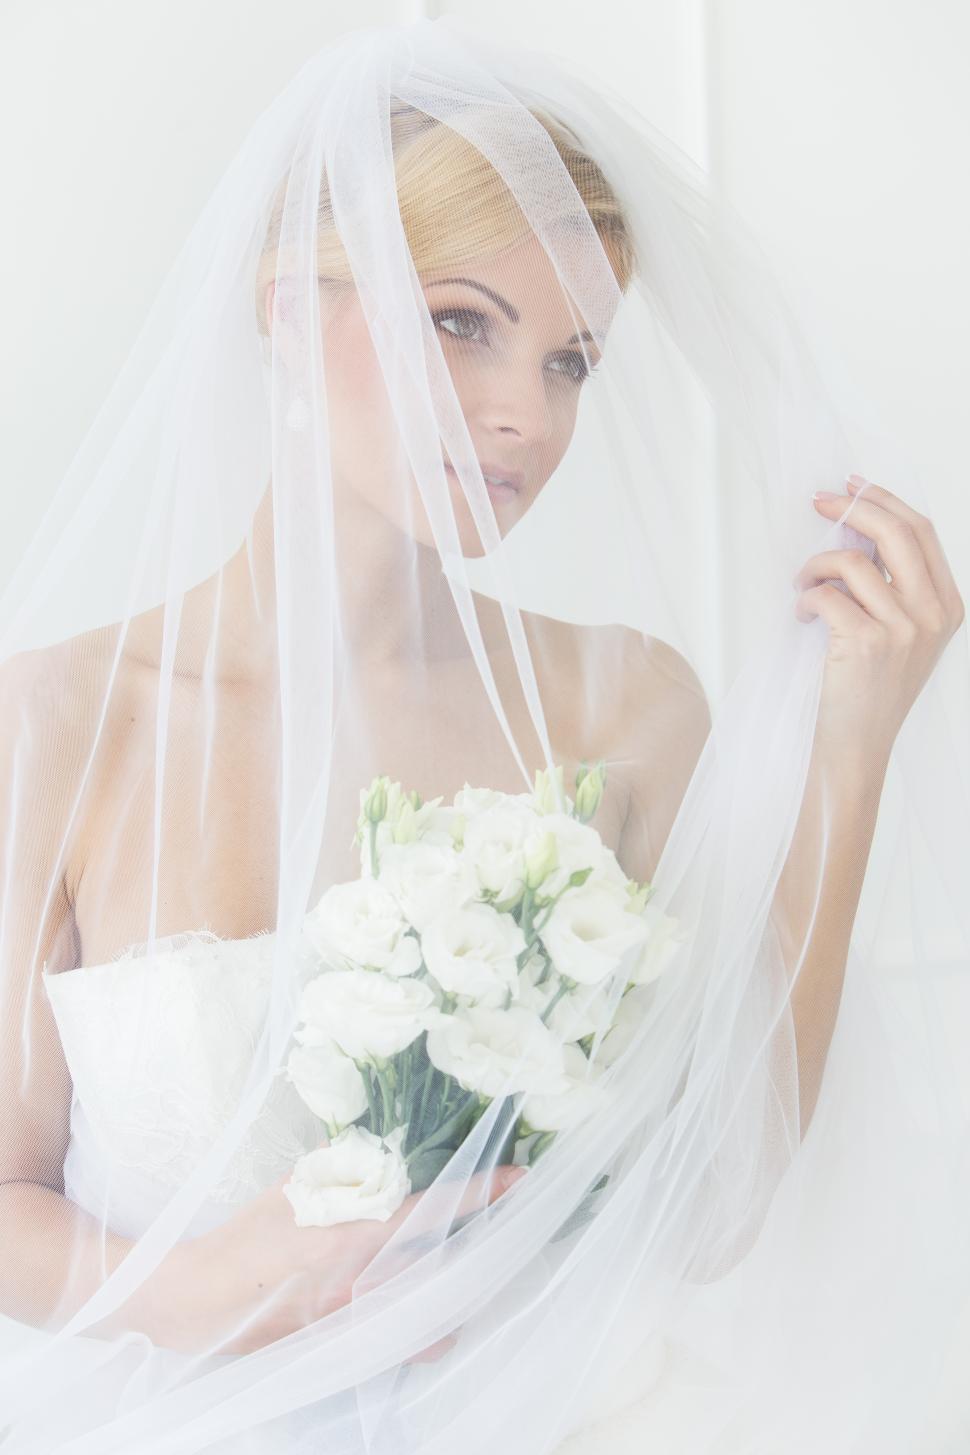 Free Image of Wedding. Beautiful bride fully covered by veil 